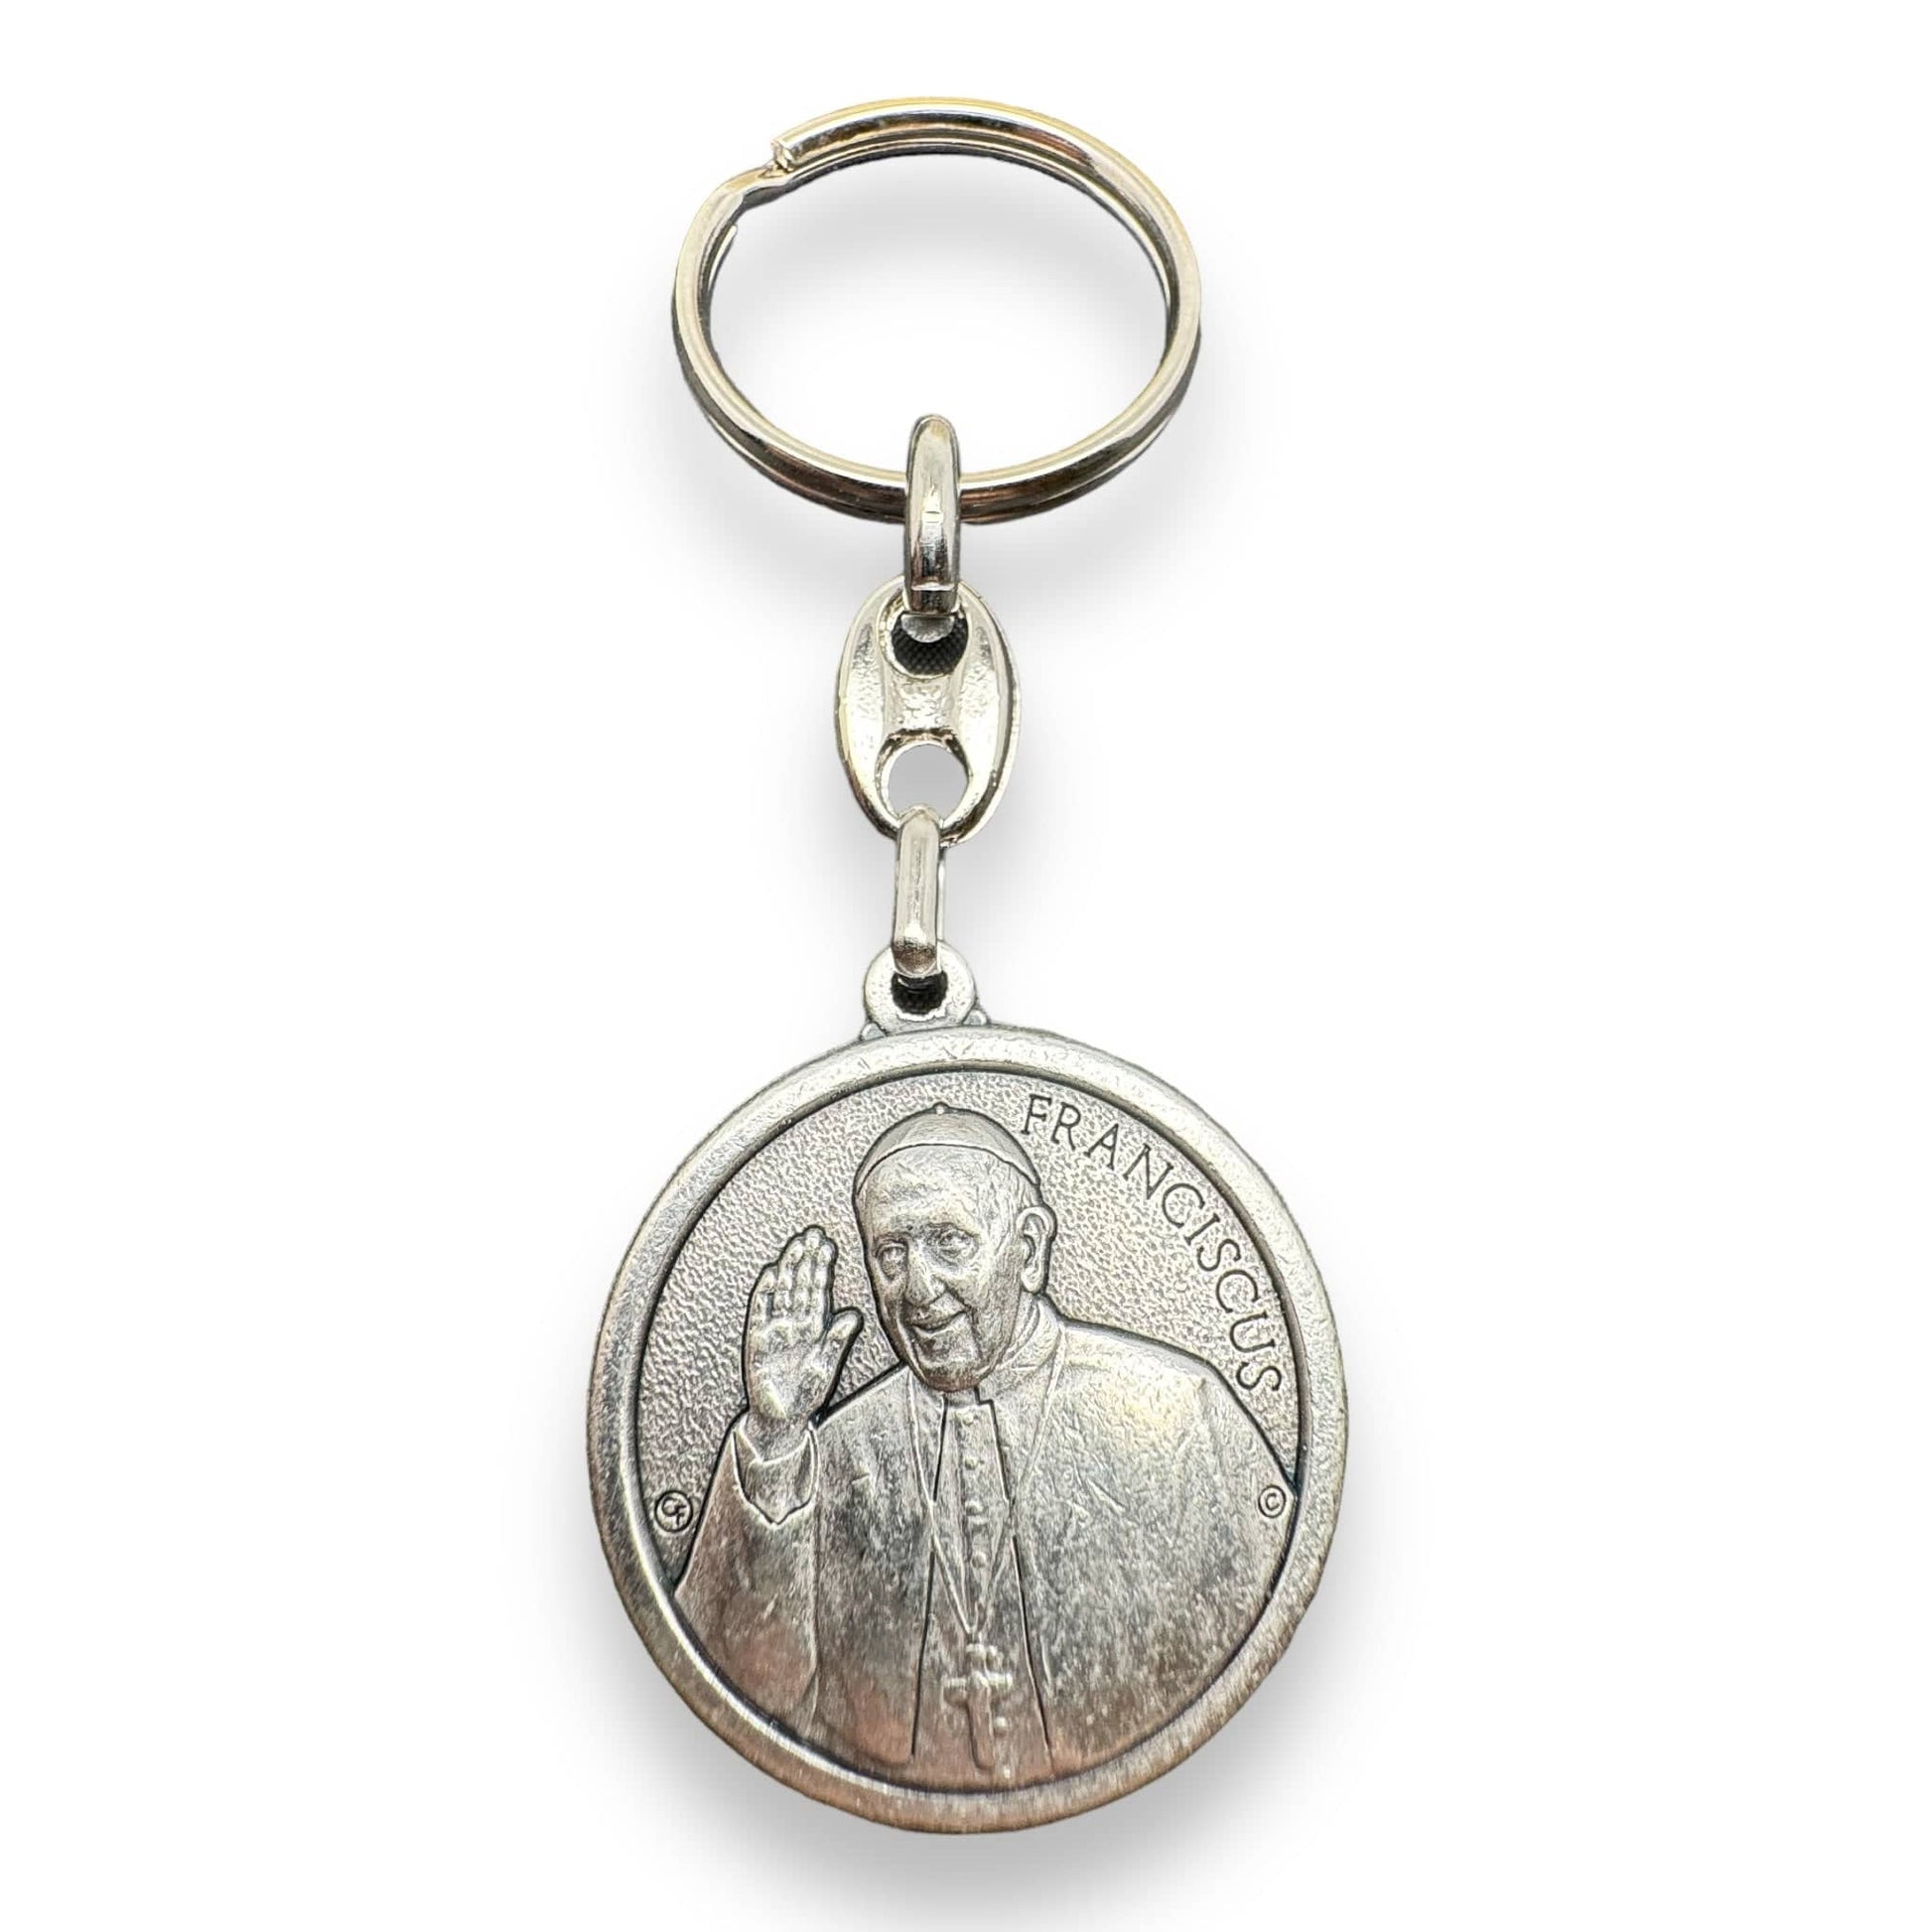 Catholically Keyring Blessed By Pope - Nice Pope Francis Key Ring - Key Chain St. Peter'S Square